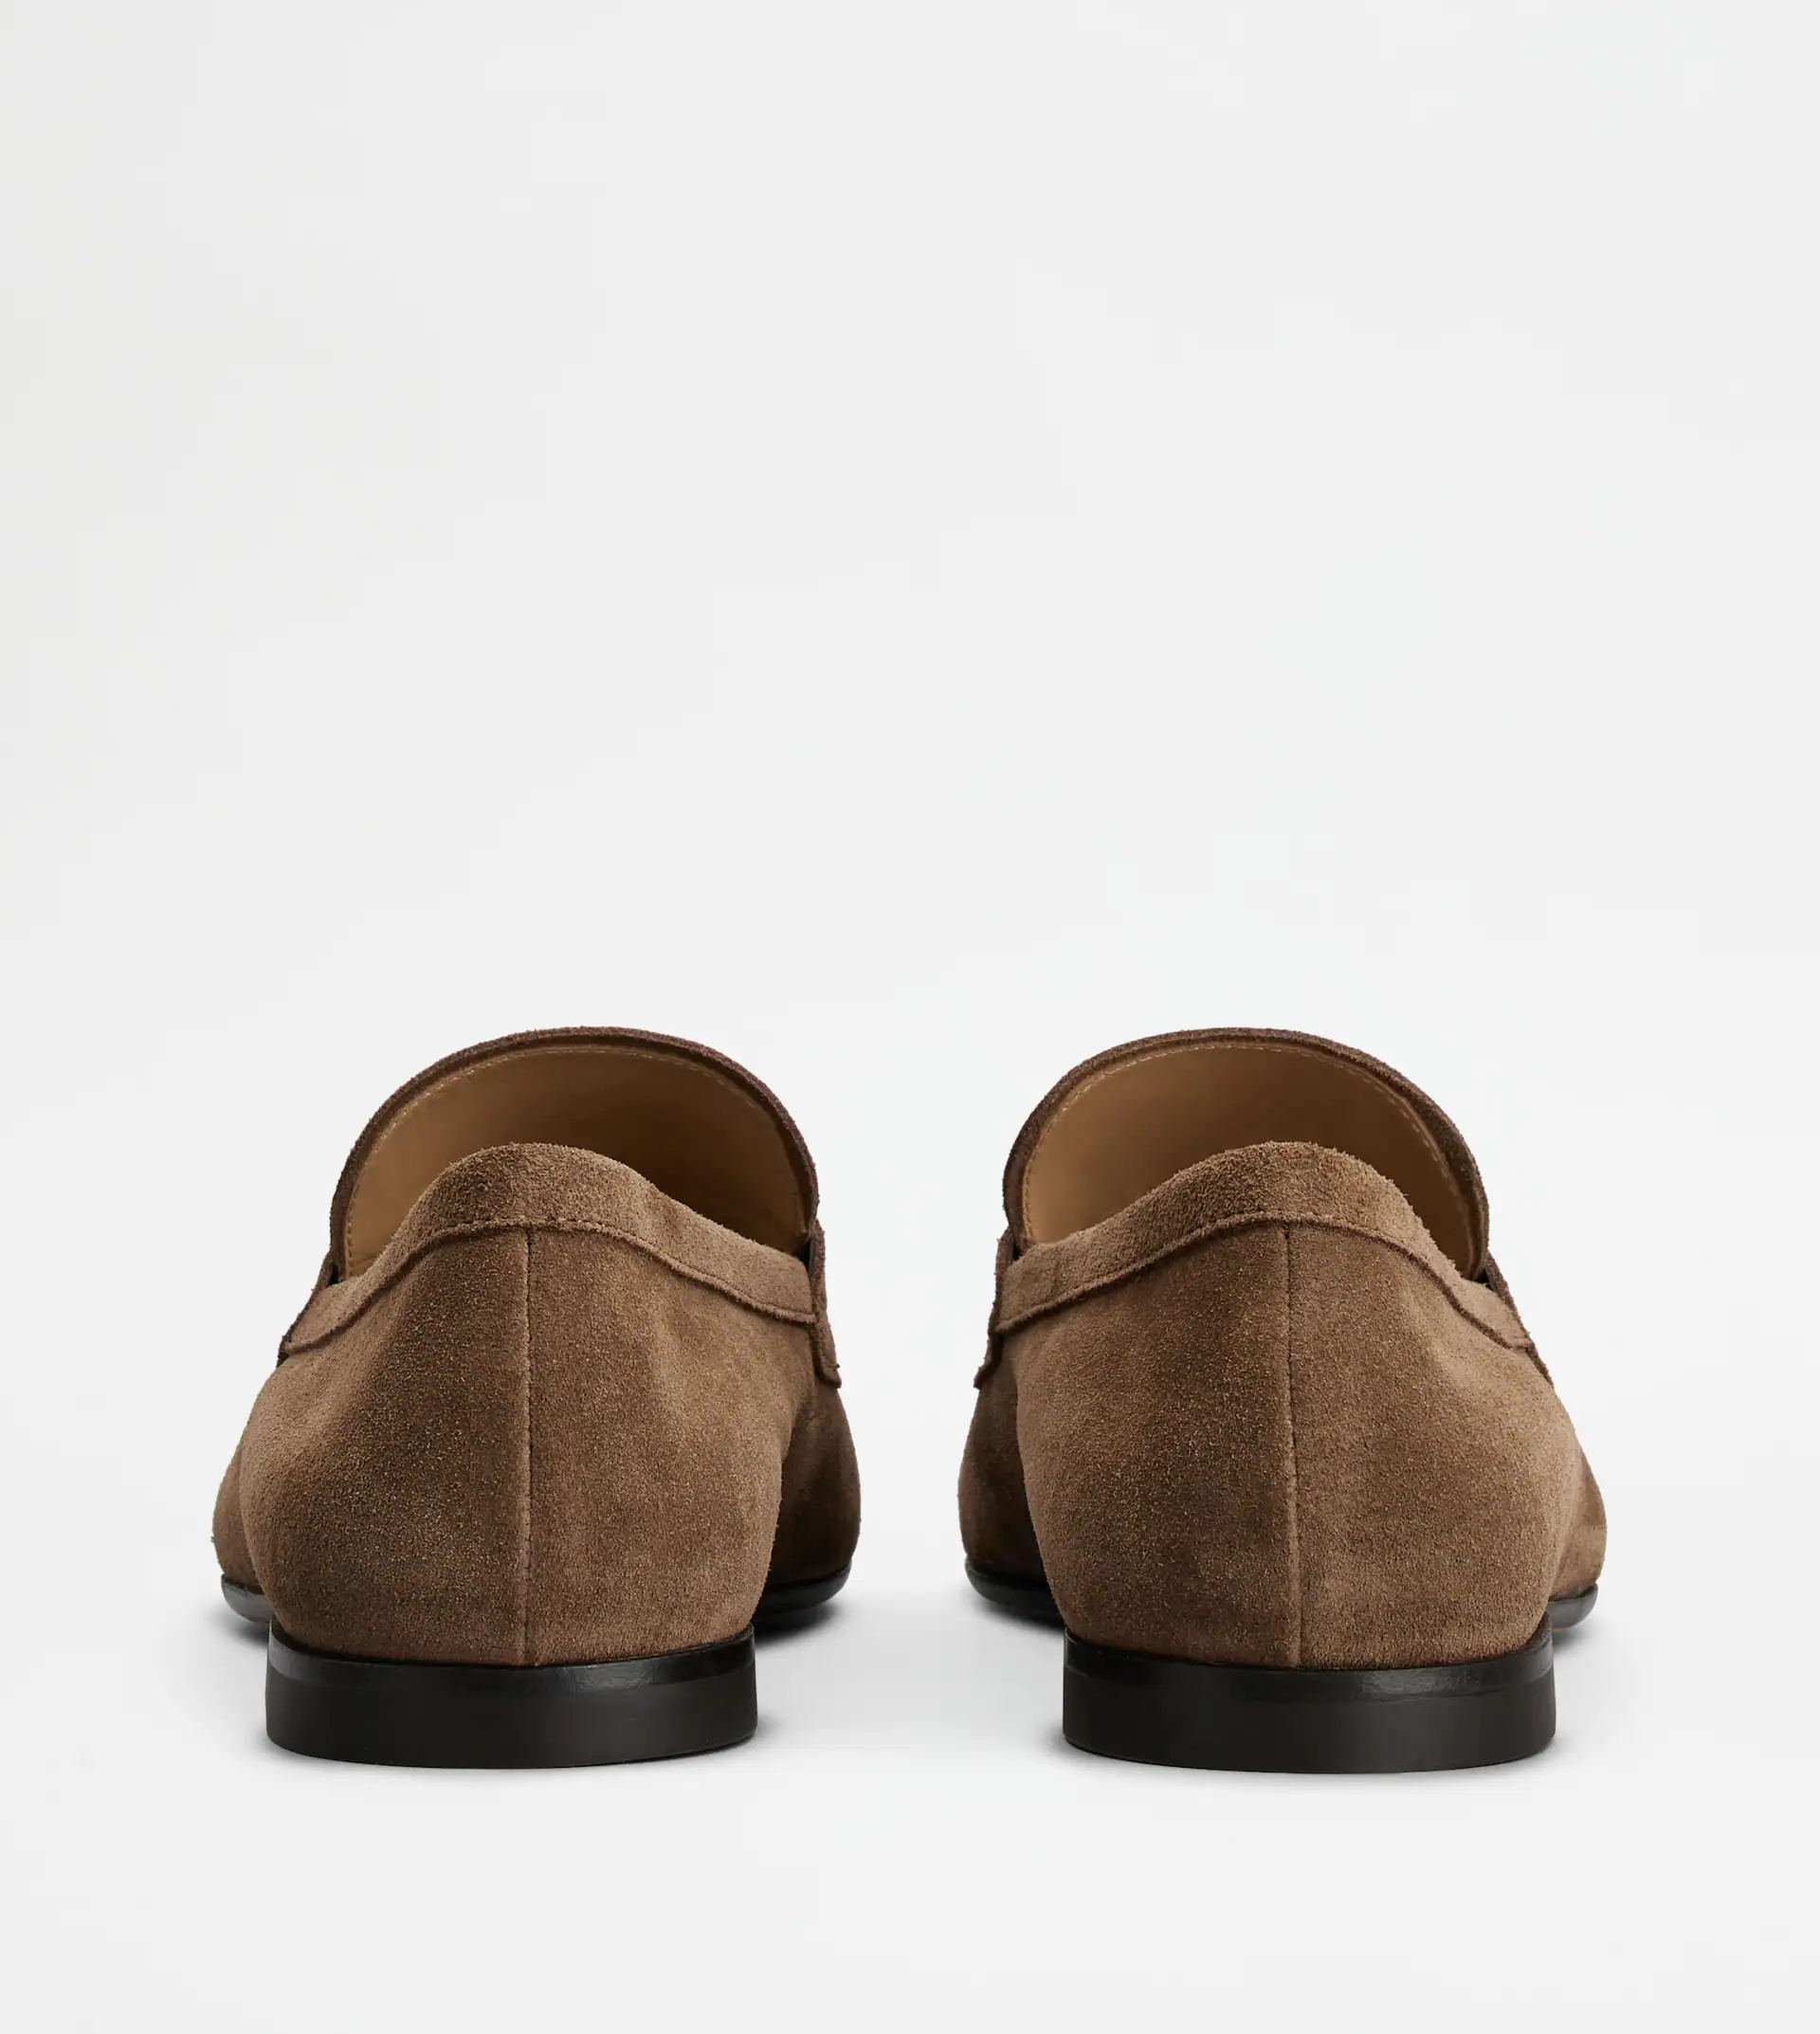 TOD'S LOAFERS IN SUEDE - BROWN - 2